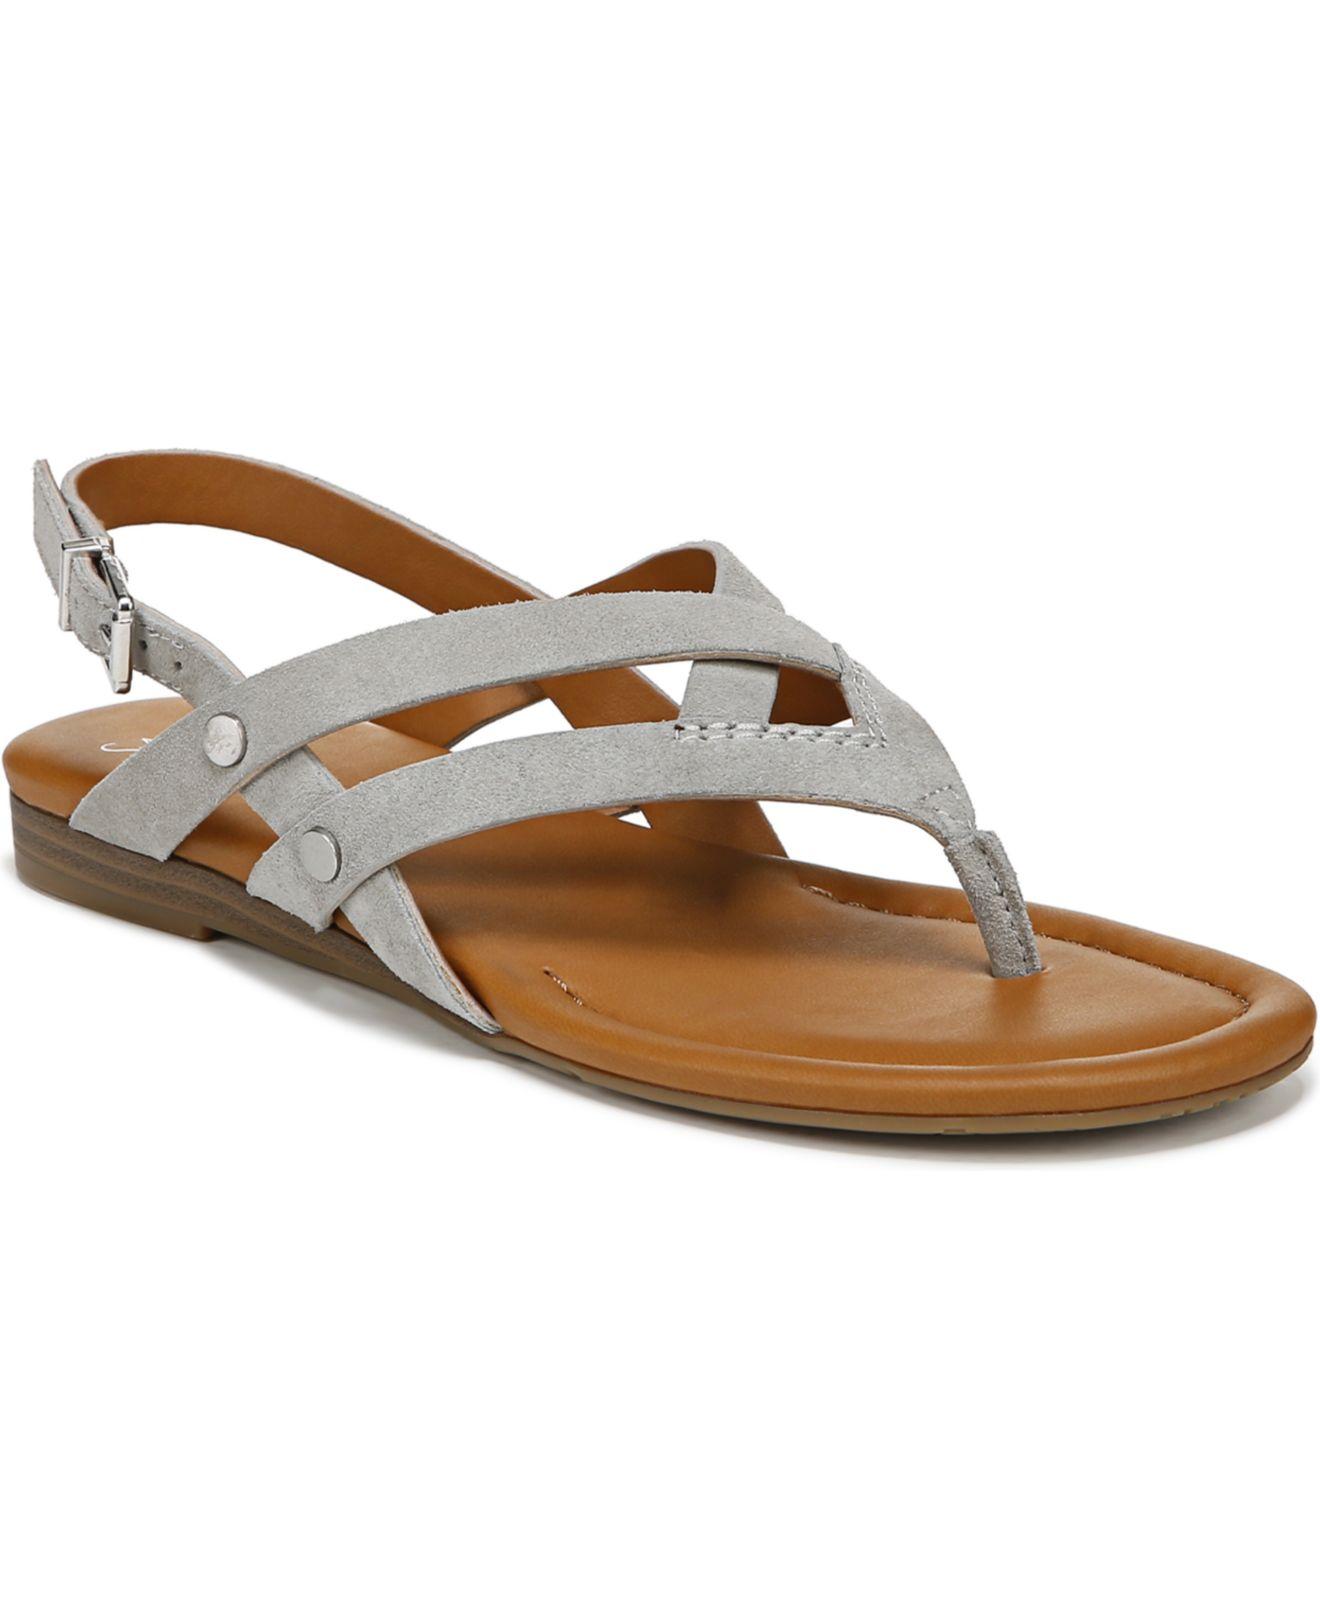 Franco Sarto Gretchen Thong Sandals in Brown | Lyst